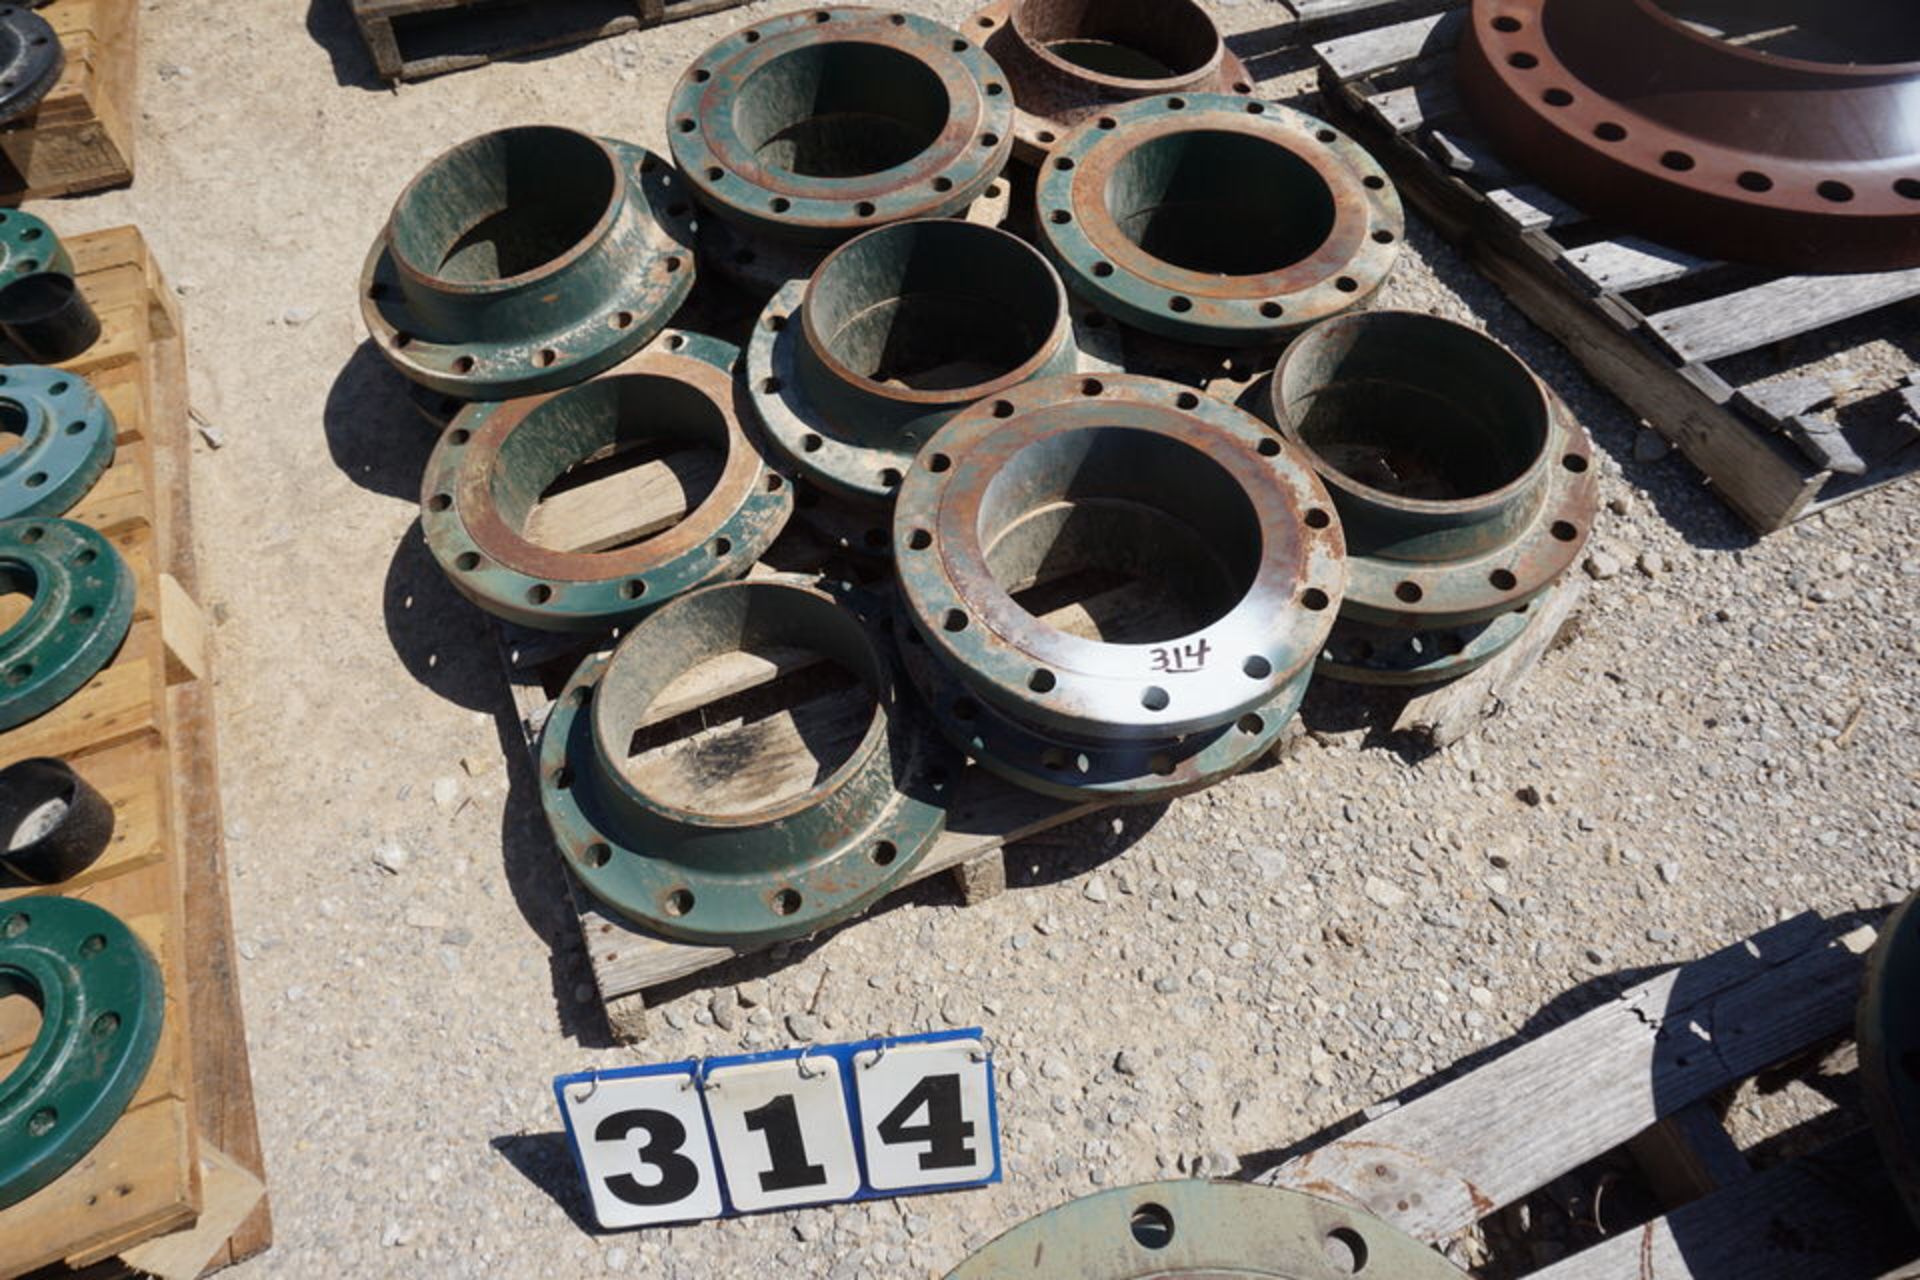 (16) TANK FLANGES APPROX 16" DIA W/ 10" HOLE